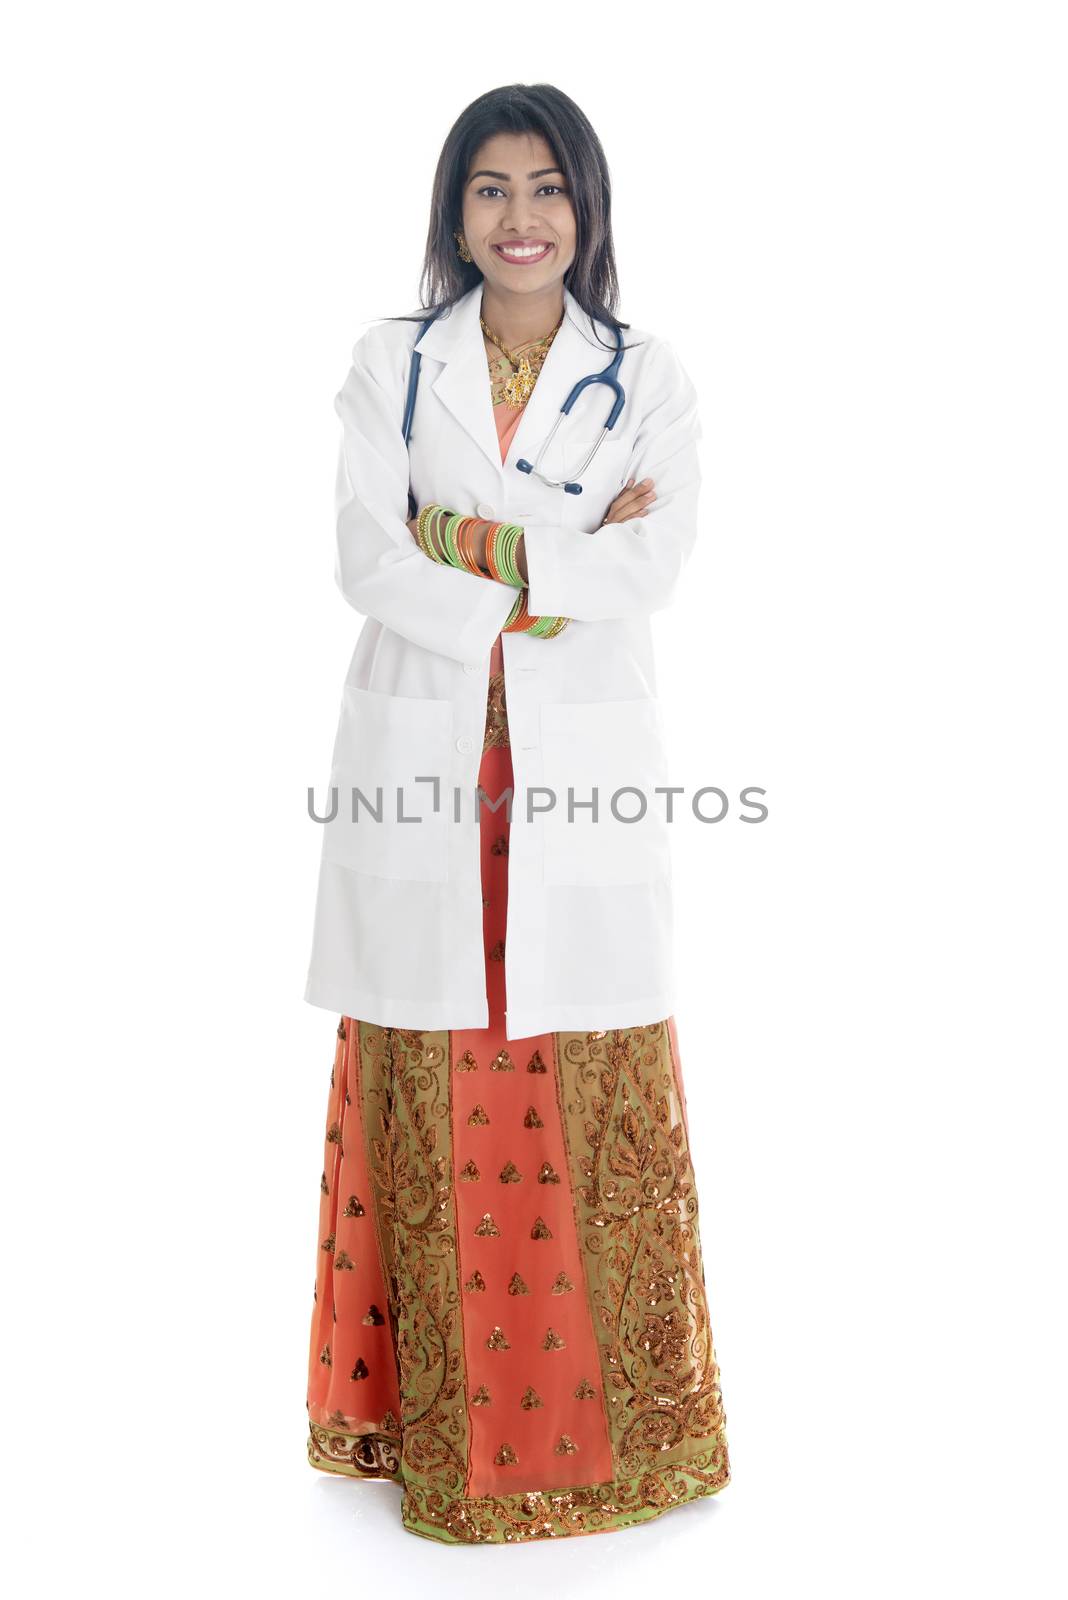 Portrait of full length Indian female medical doctor standing isolated on white background.